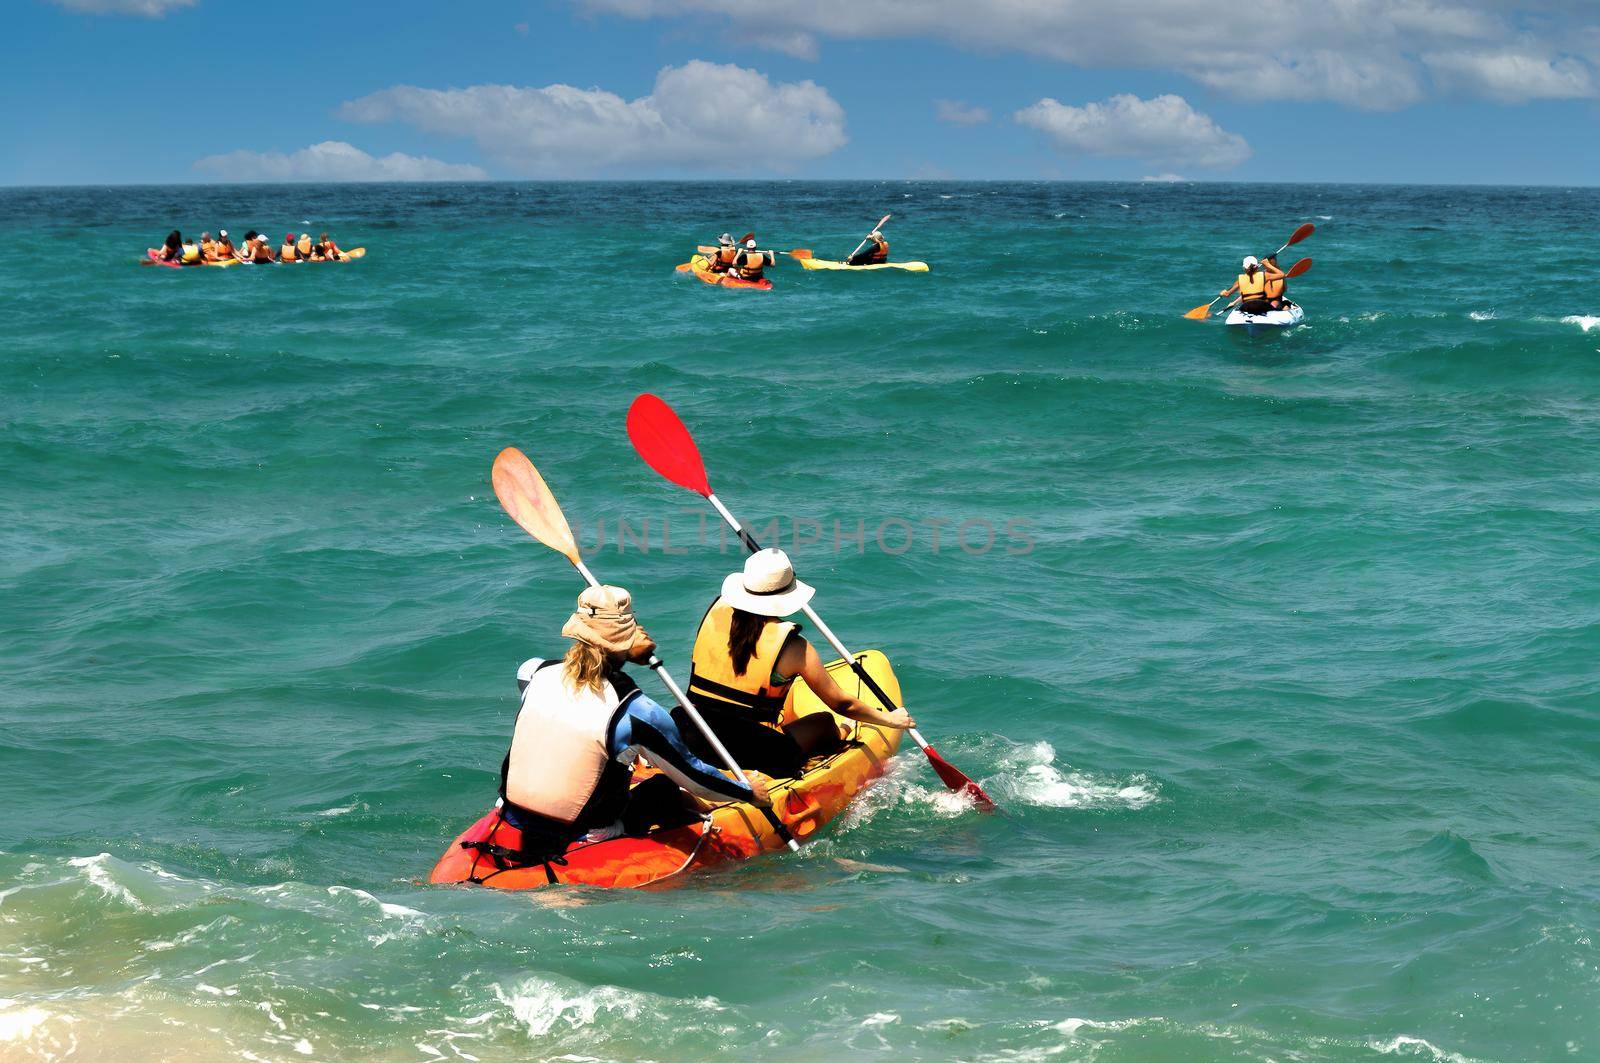 Kayak lovers gathered on Sunday in a large group to go kayaking in the warm sea